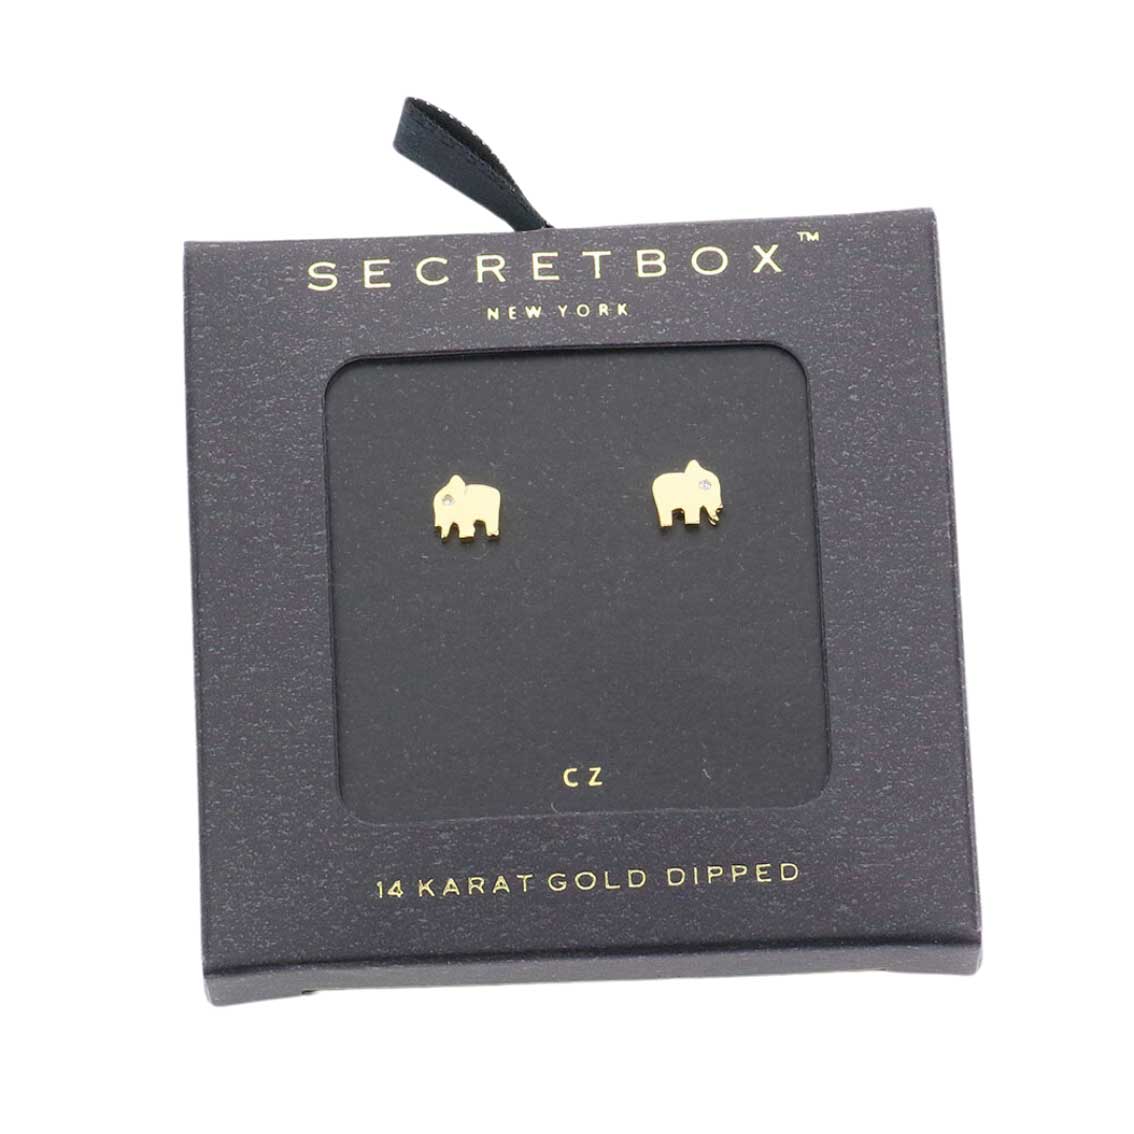 Gold Secret Box 14K Gold Dipped CZ Stone Elephant Stud Earrings, are an elegant addition to any outfit. Crafted with 14K gold dipped and high-grade cubic zirconia, these earrings feature a discreet design perfect for adding subtle sparkle to your look. Perfect Gift for Birthday, Anniversary, Mother's Day, Anniversary Gift.